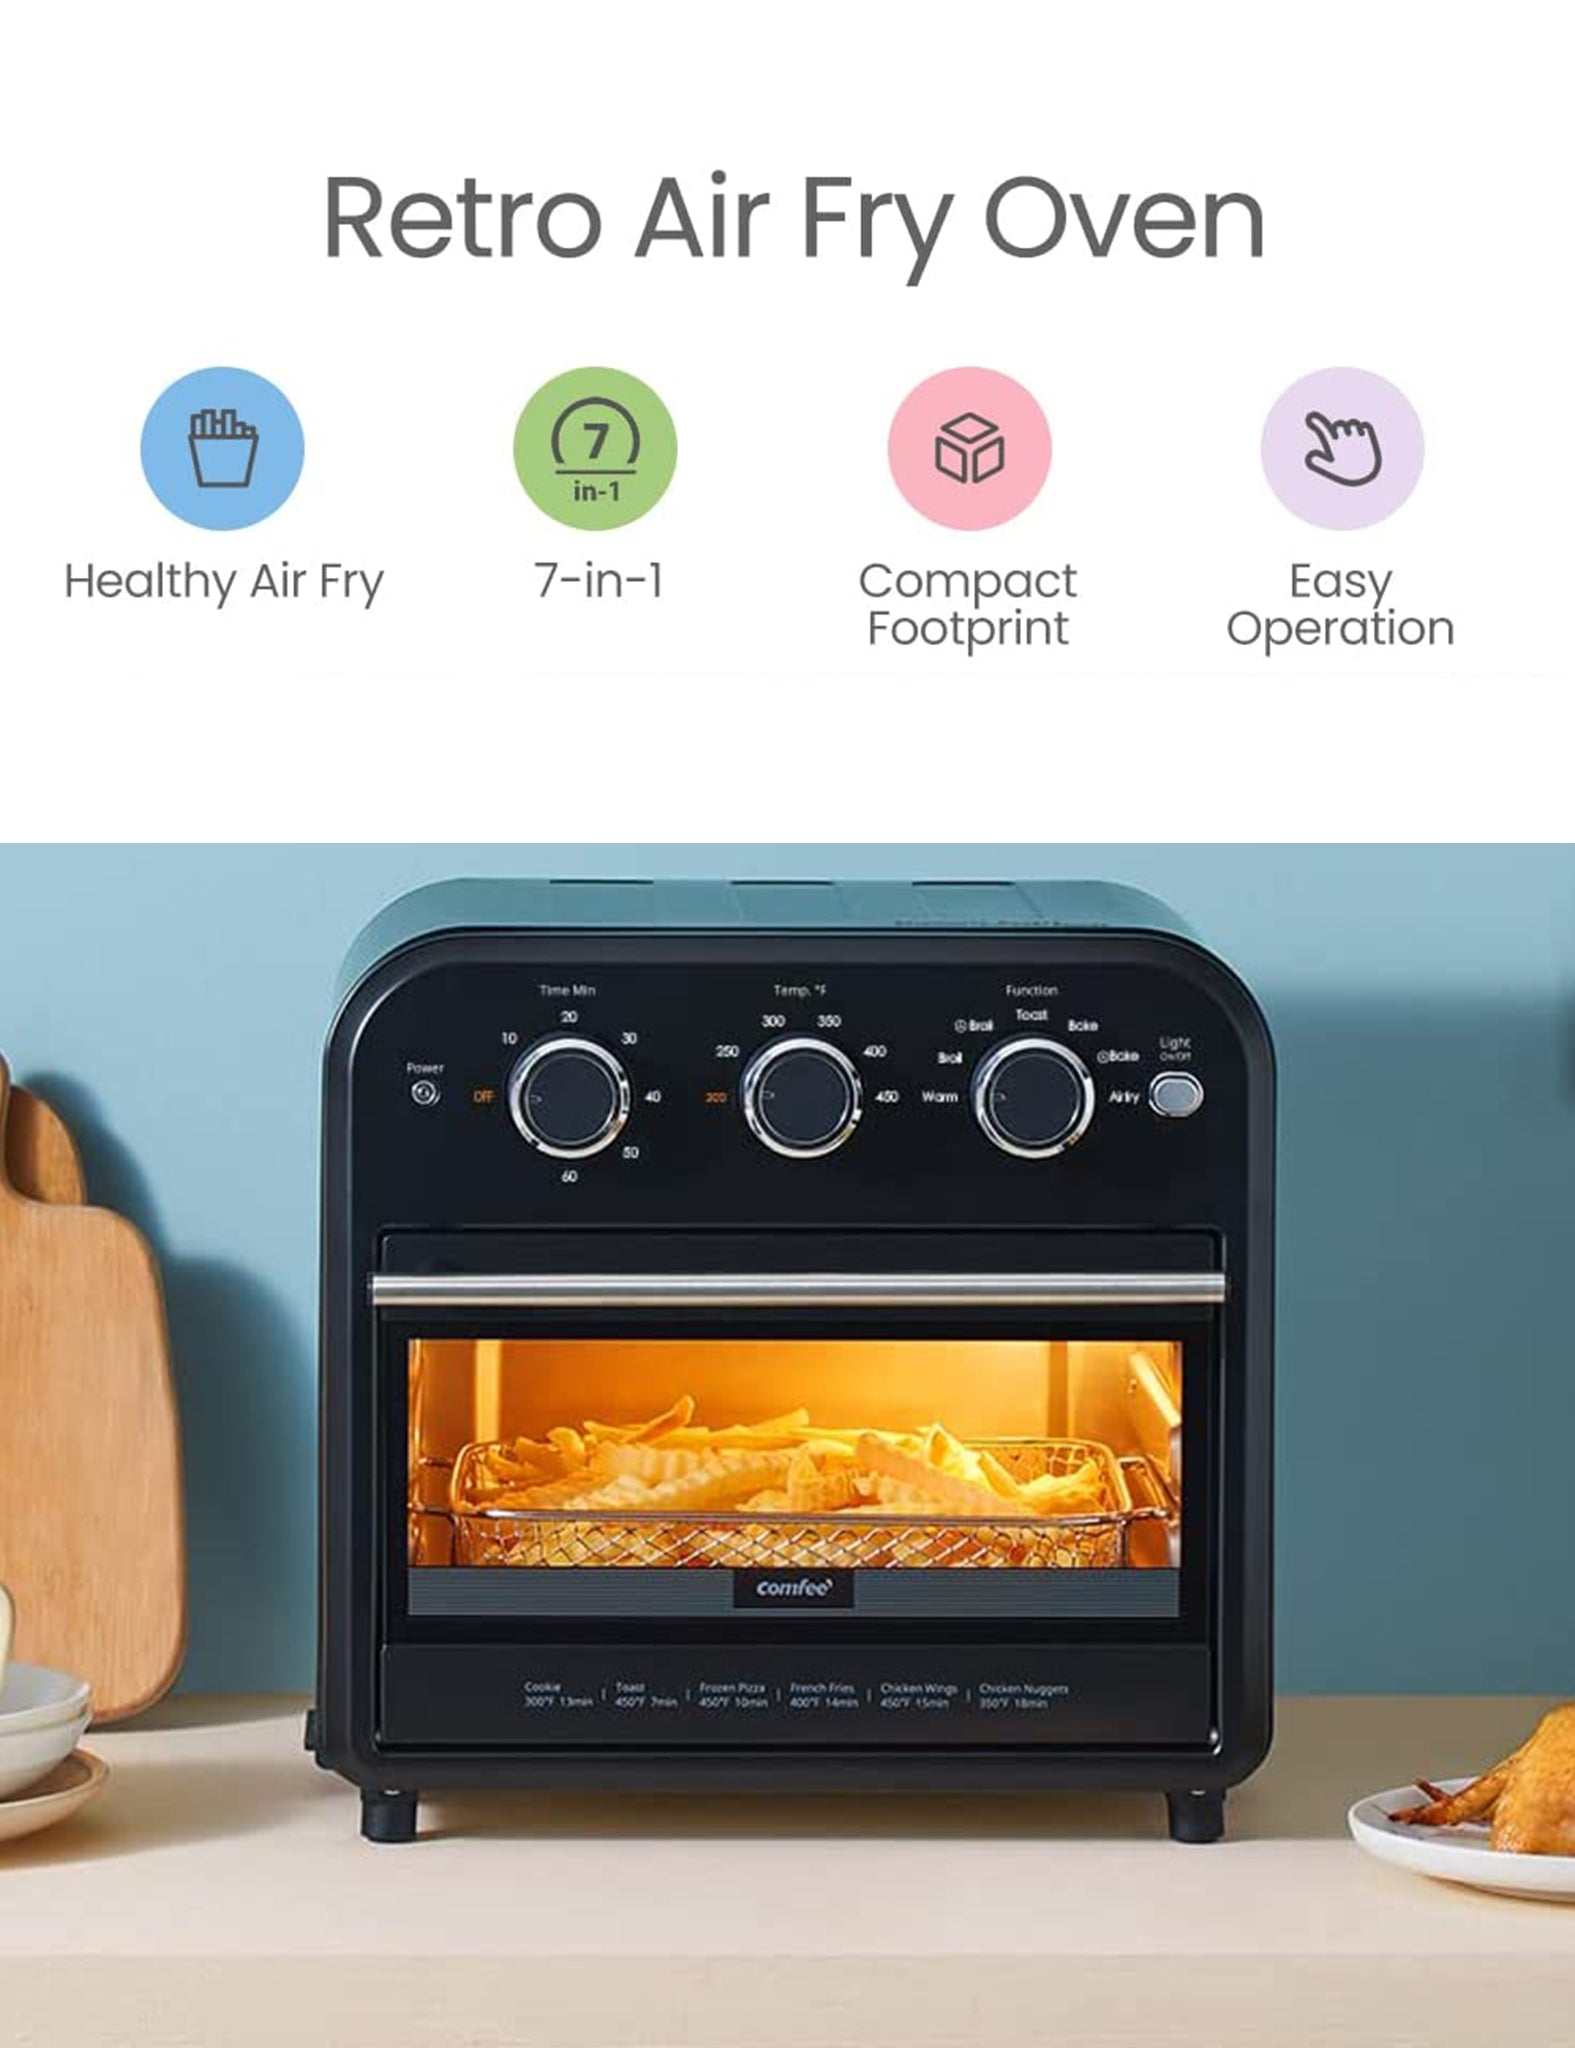 COMFEE' Toaster Oven Air Fryer FLASHWAVE Convection Toaster Oven 24QT 1750W  Bake Broil Roast